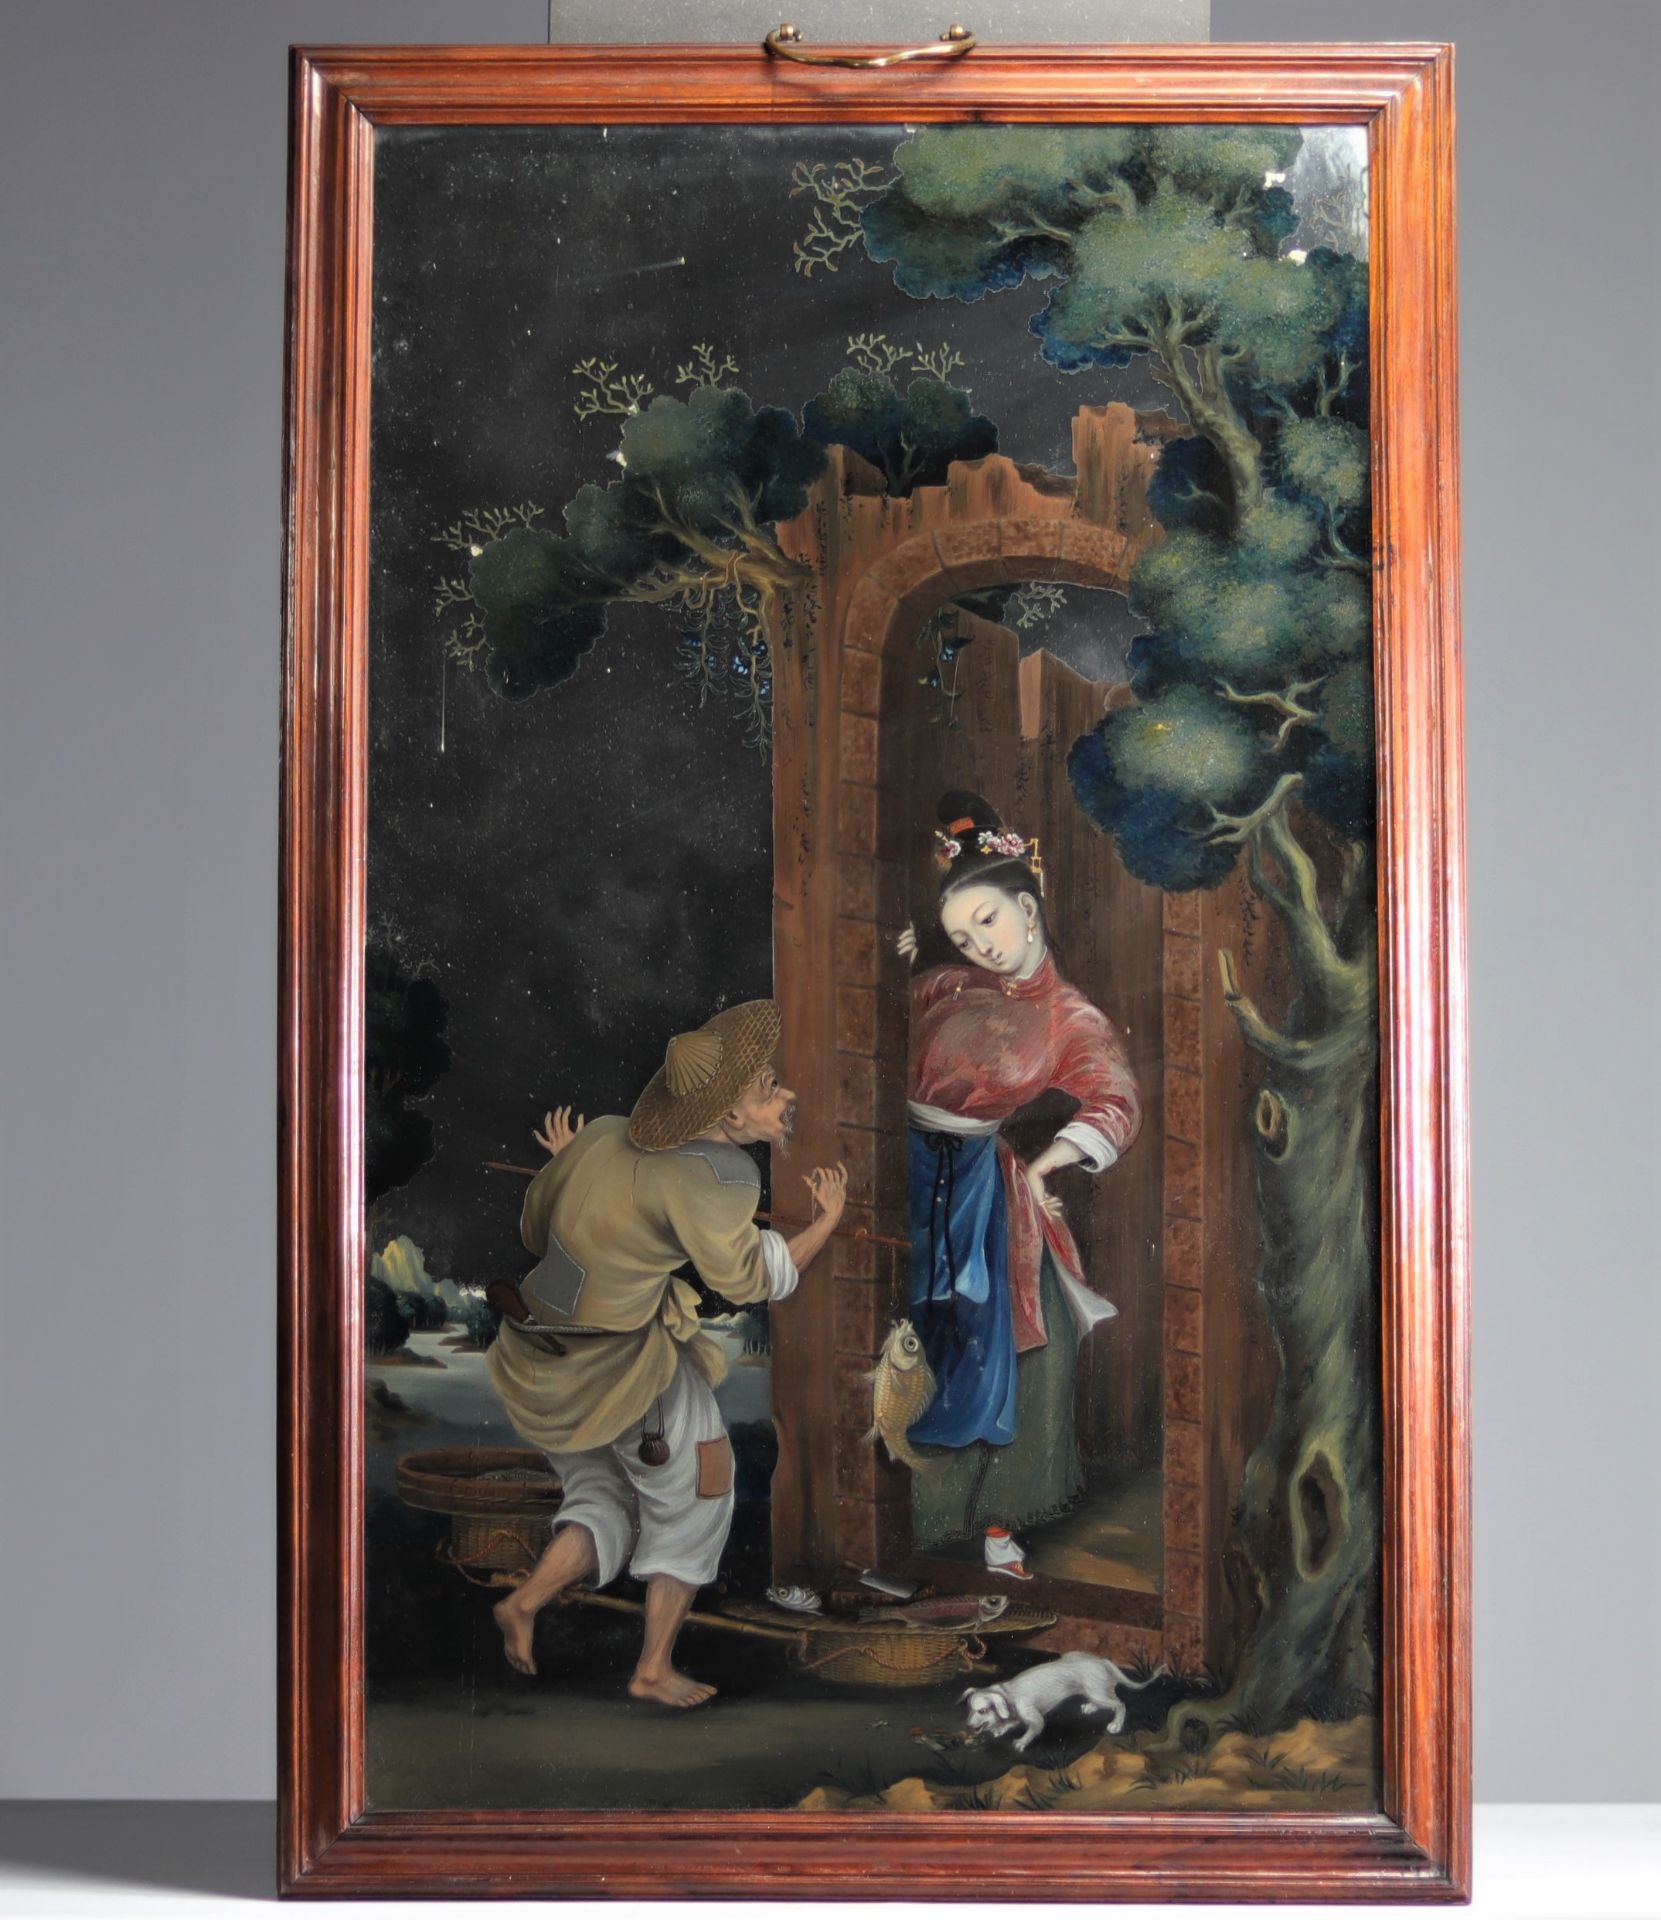 Rare 18th century China under glass painting, young woman and fishmonger. - Image 2 of 5